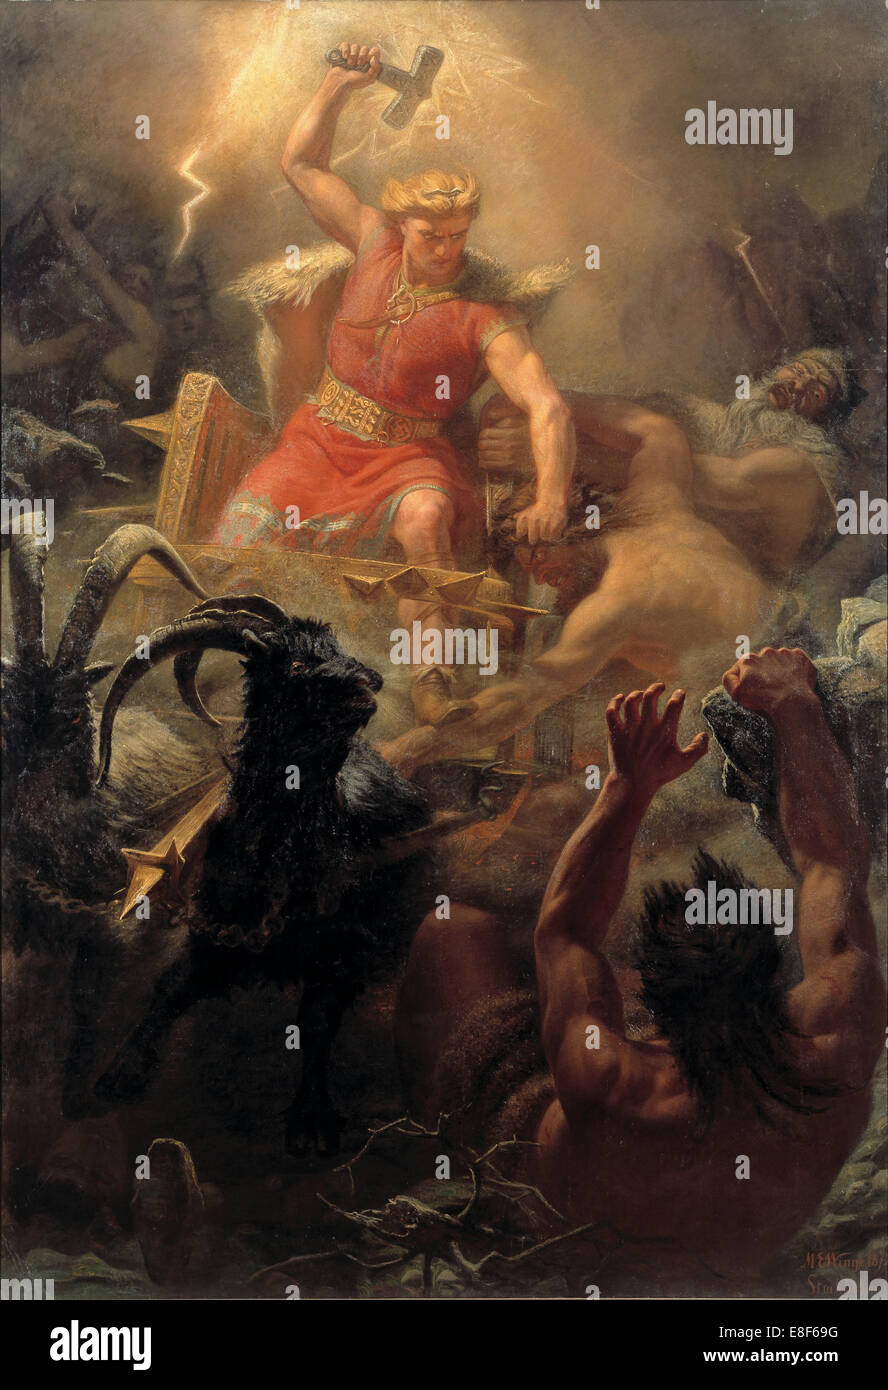 Thor's Fight with the Giants. Artist: Winge, Marten Eskil (1825-1896) Stock Photo